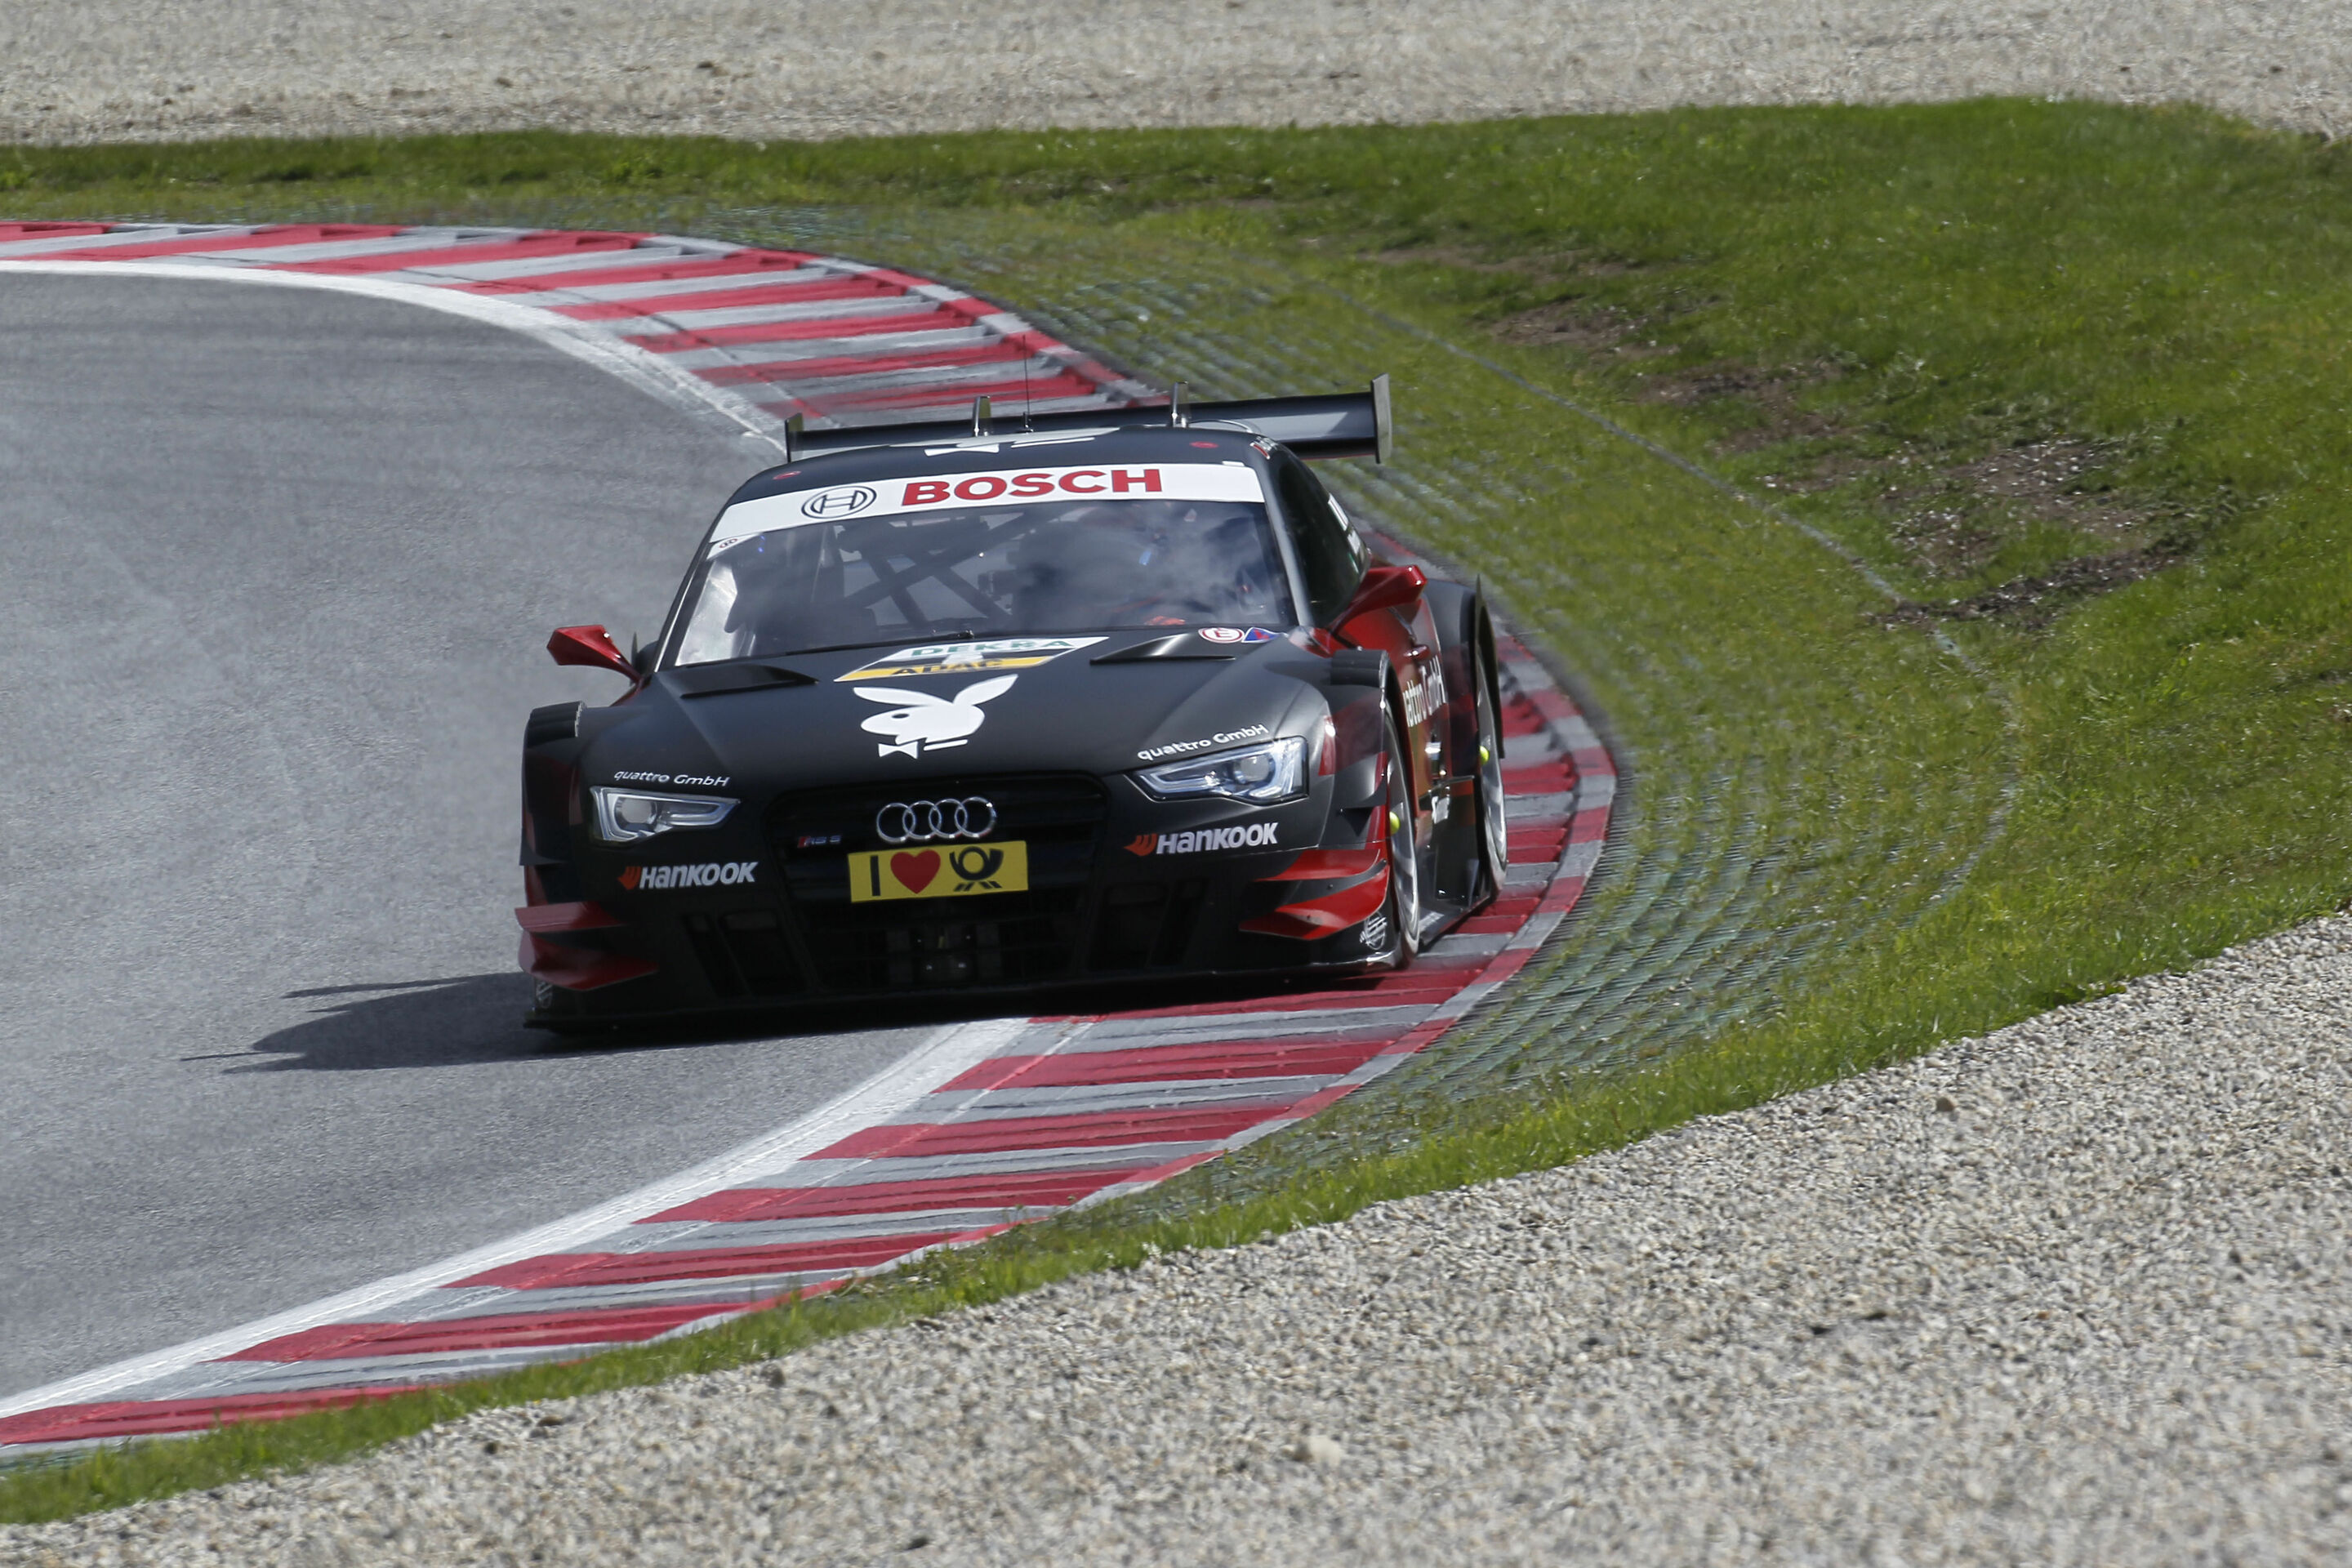 Quotes after qualifying at Red Bull Ring